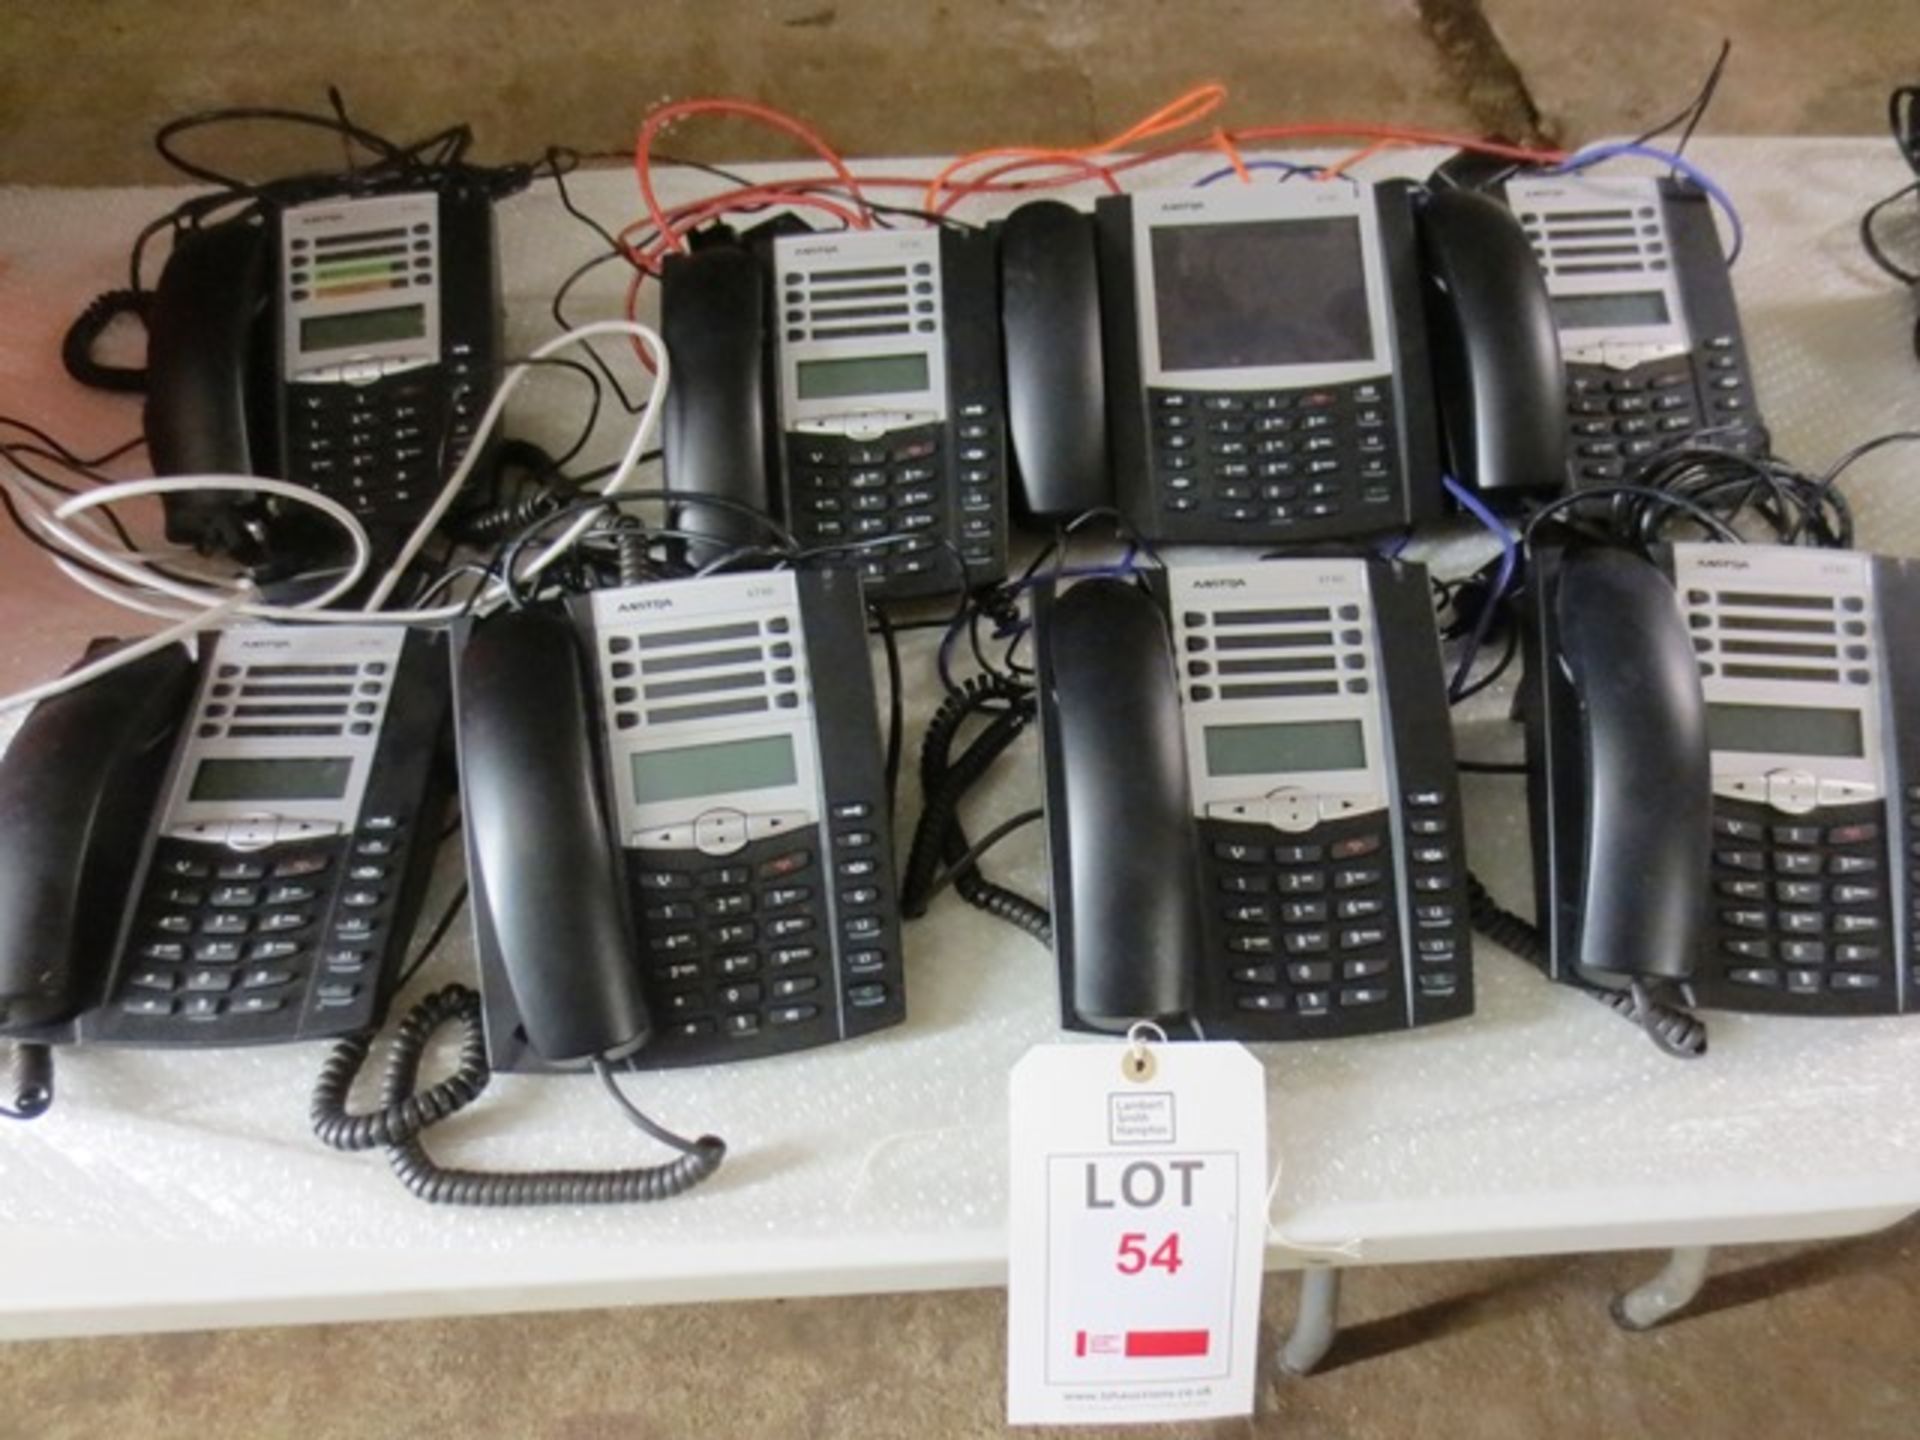 Seven Aastra 6730i telephone handsets, and one Aastra 6739i telephone handset